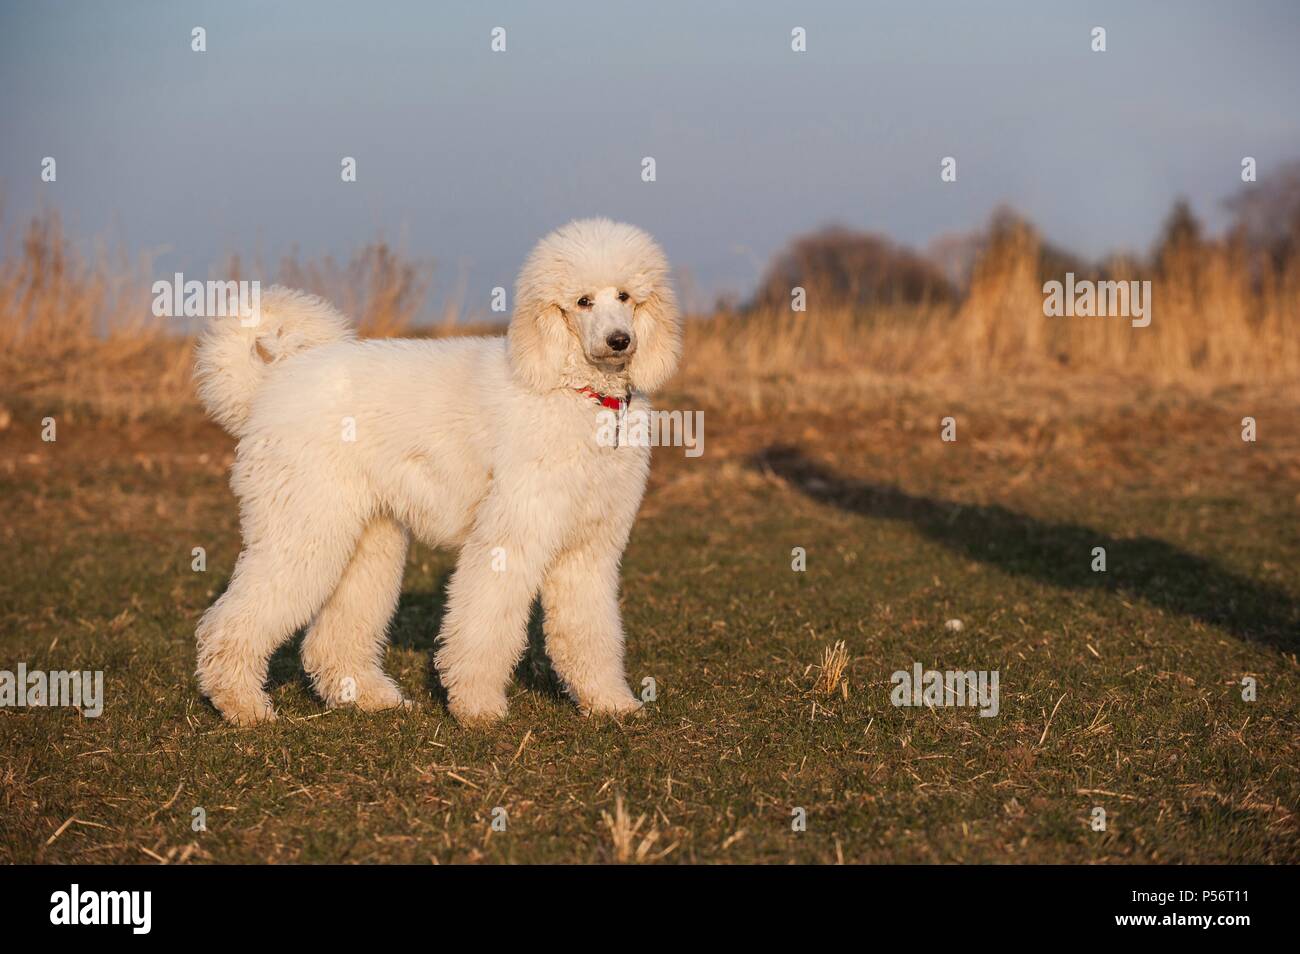 young Giant Poodle Stock Photo